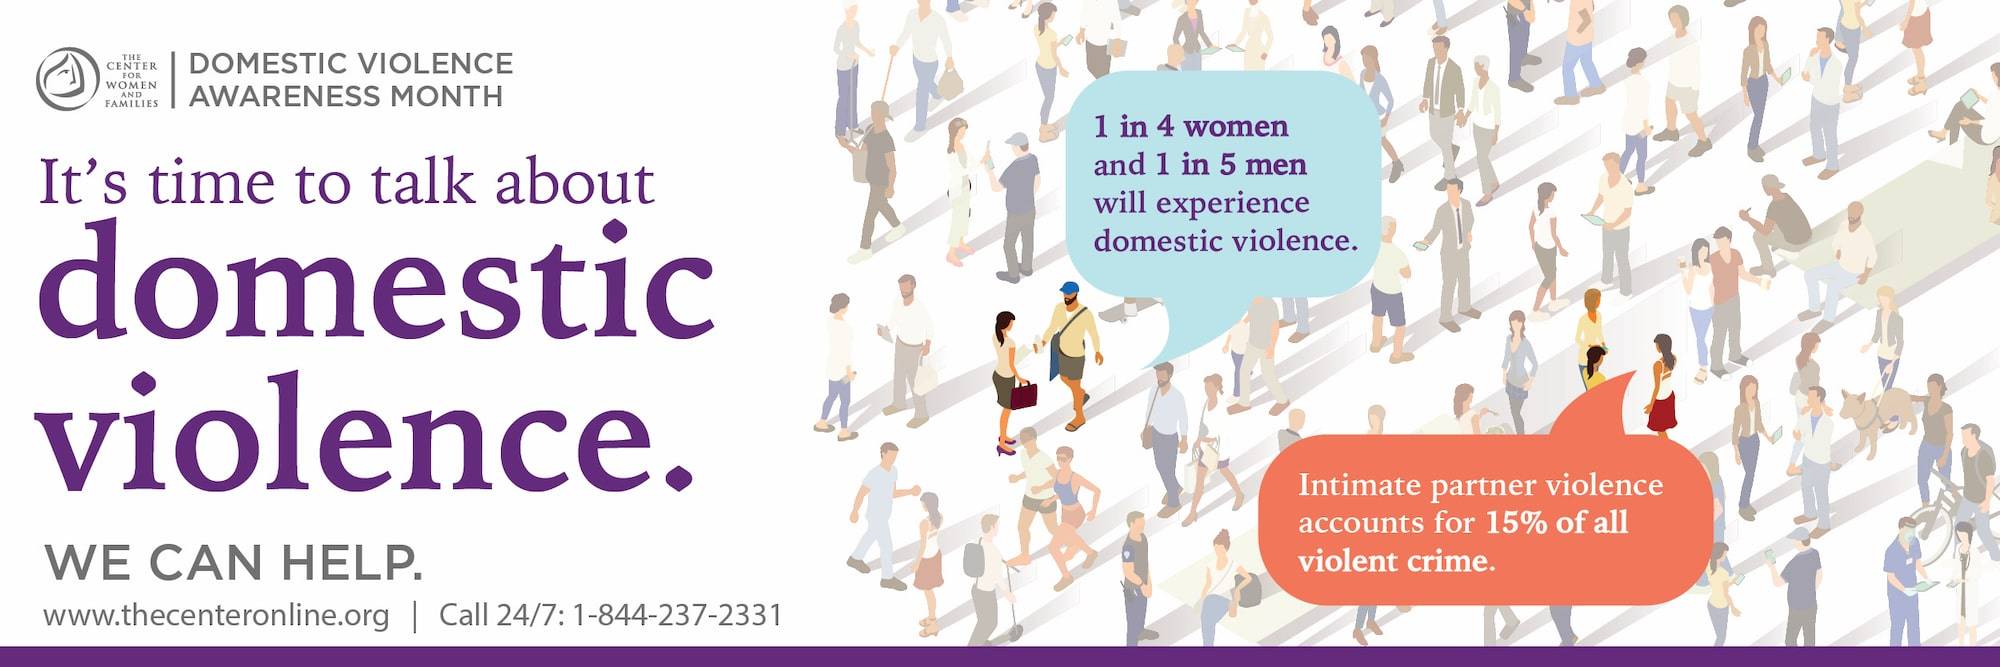 It's time to talk about Domestic Violence